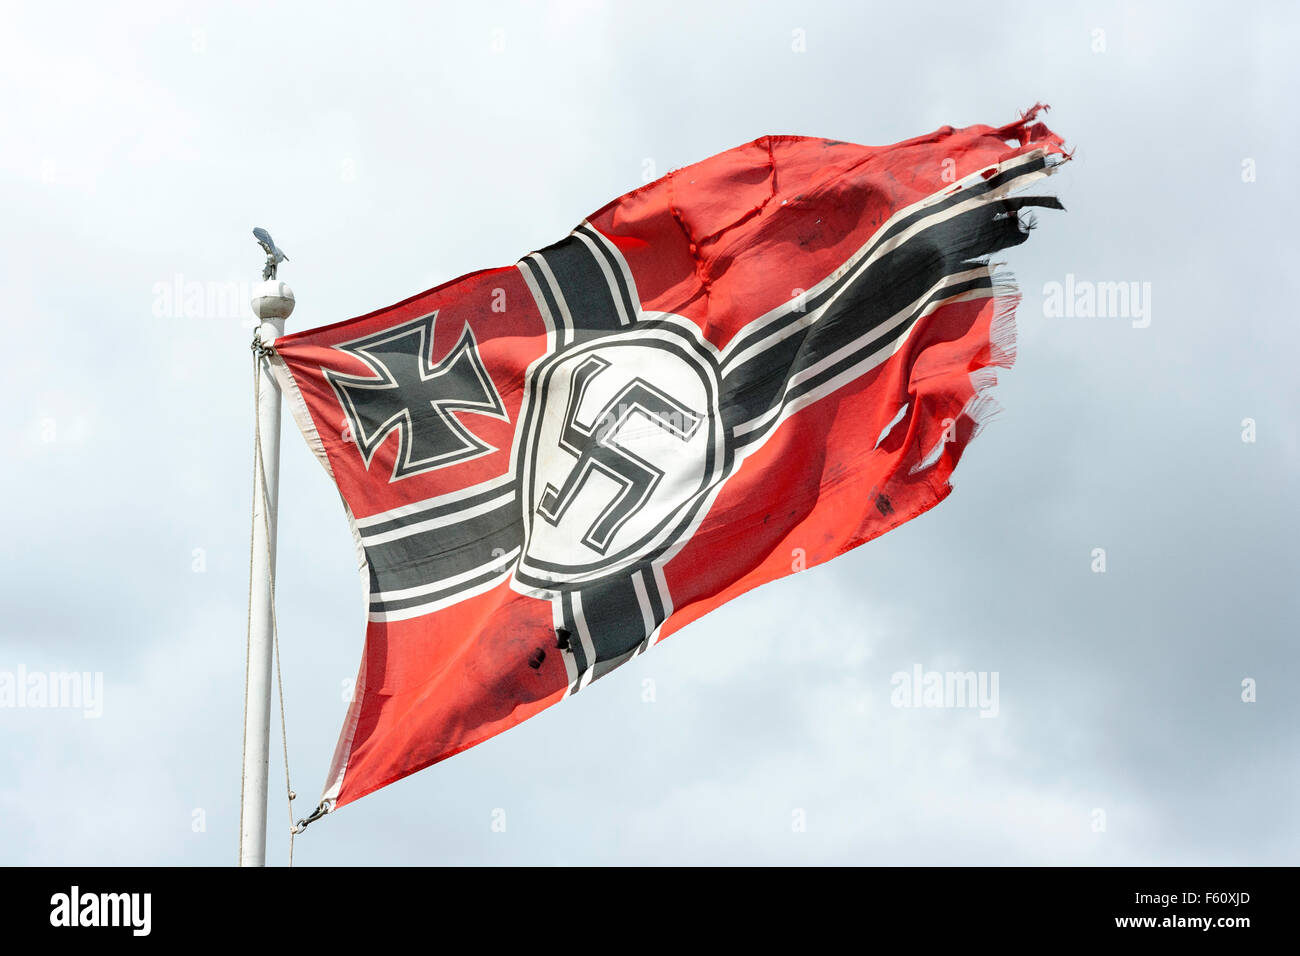 World war two Re-enactment. War torn German Wehrmacht flag with Iron cross and Nazi swastika, fluttering on top of flagpole against stormy grey sky. Stock Photo